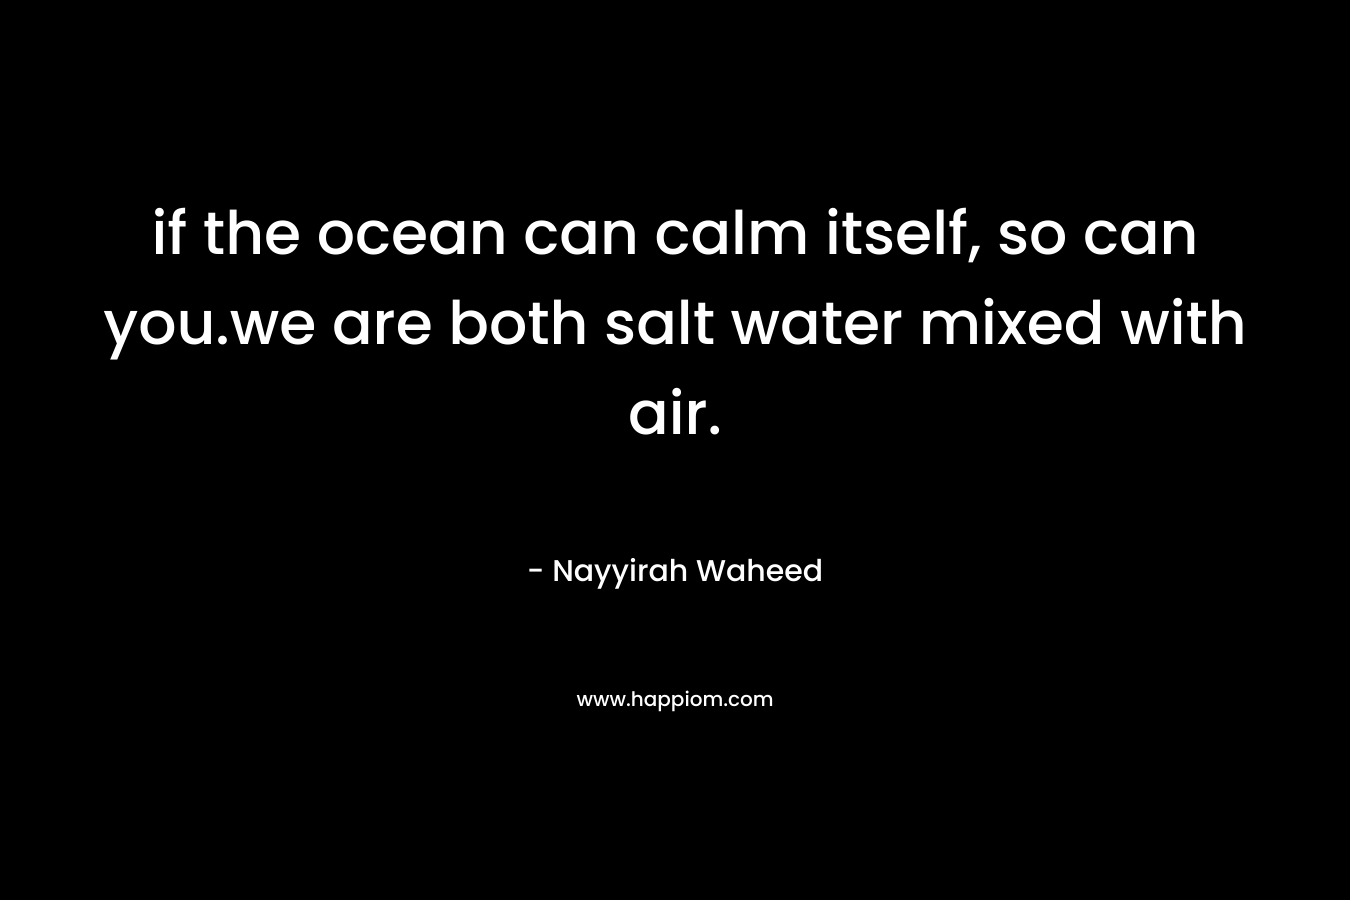 if the ocean can calm itself, so can you.we are both salt water mixed with air.